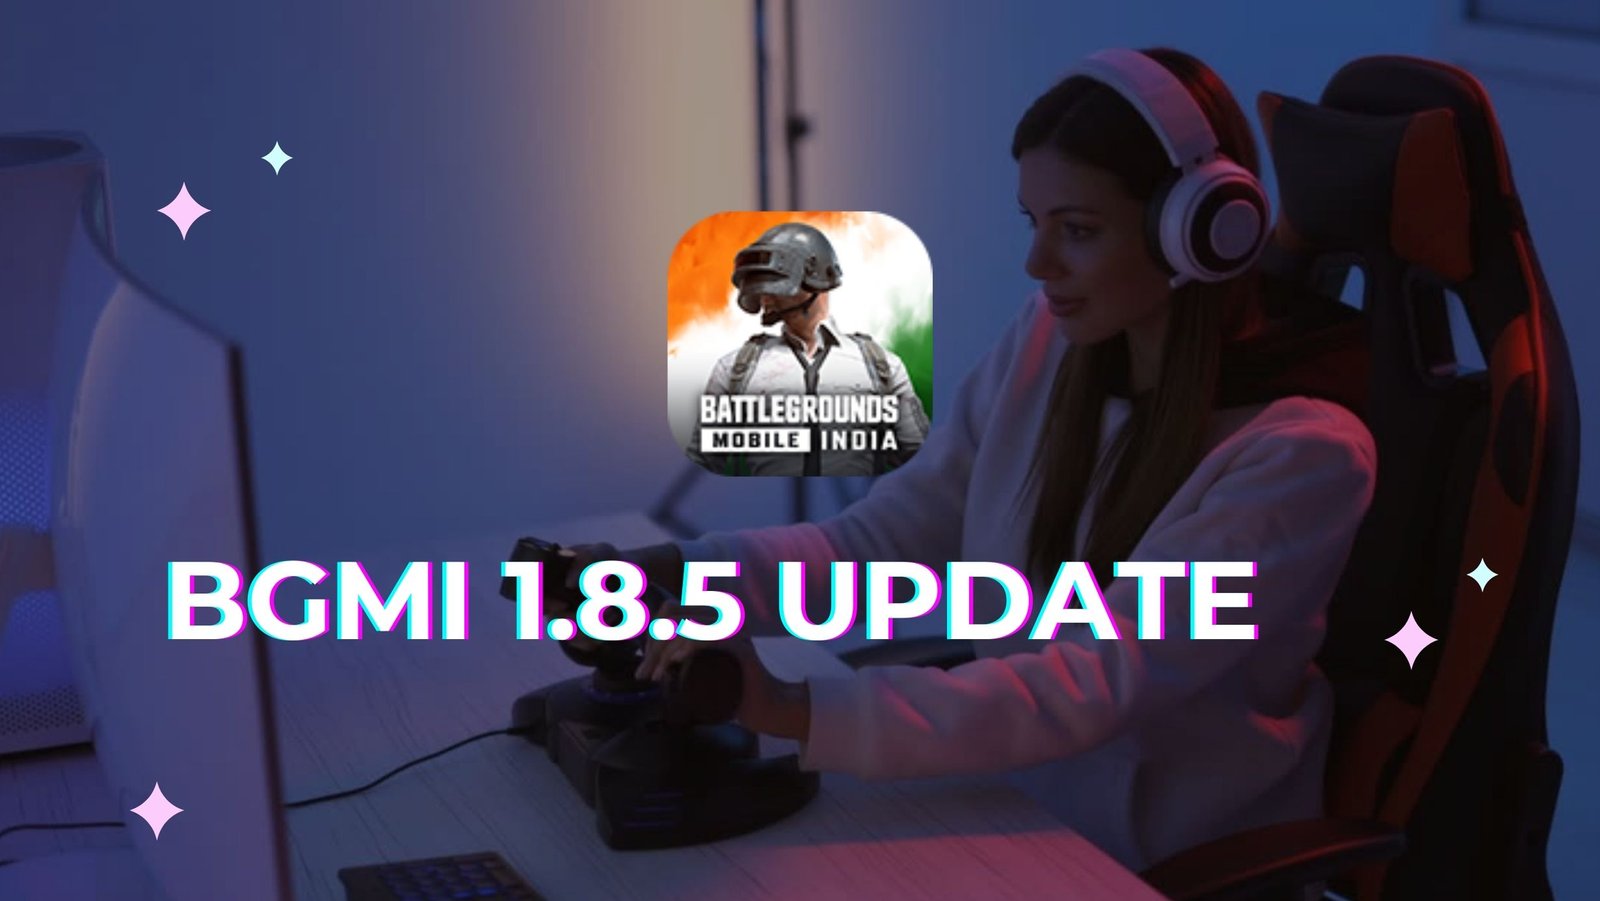 BGMI 1.8.5 Update: Download, Release date, APK & OBB, Patch Notes, Beta Version, and more